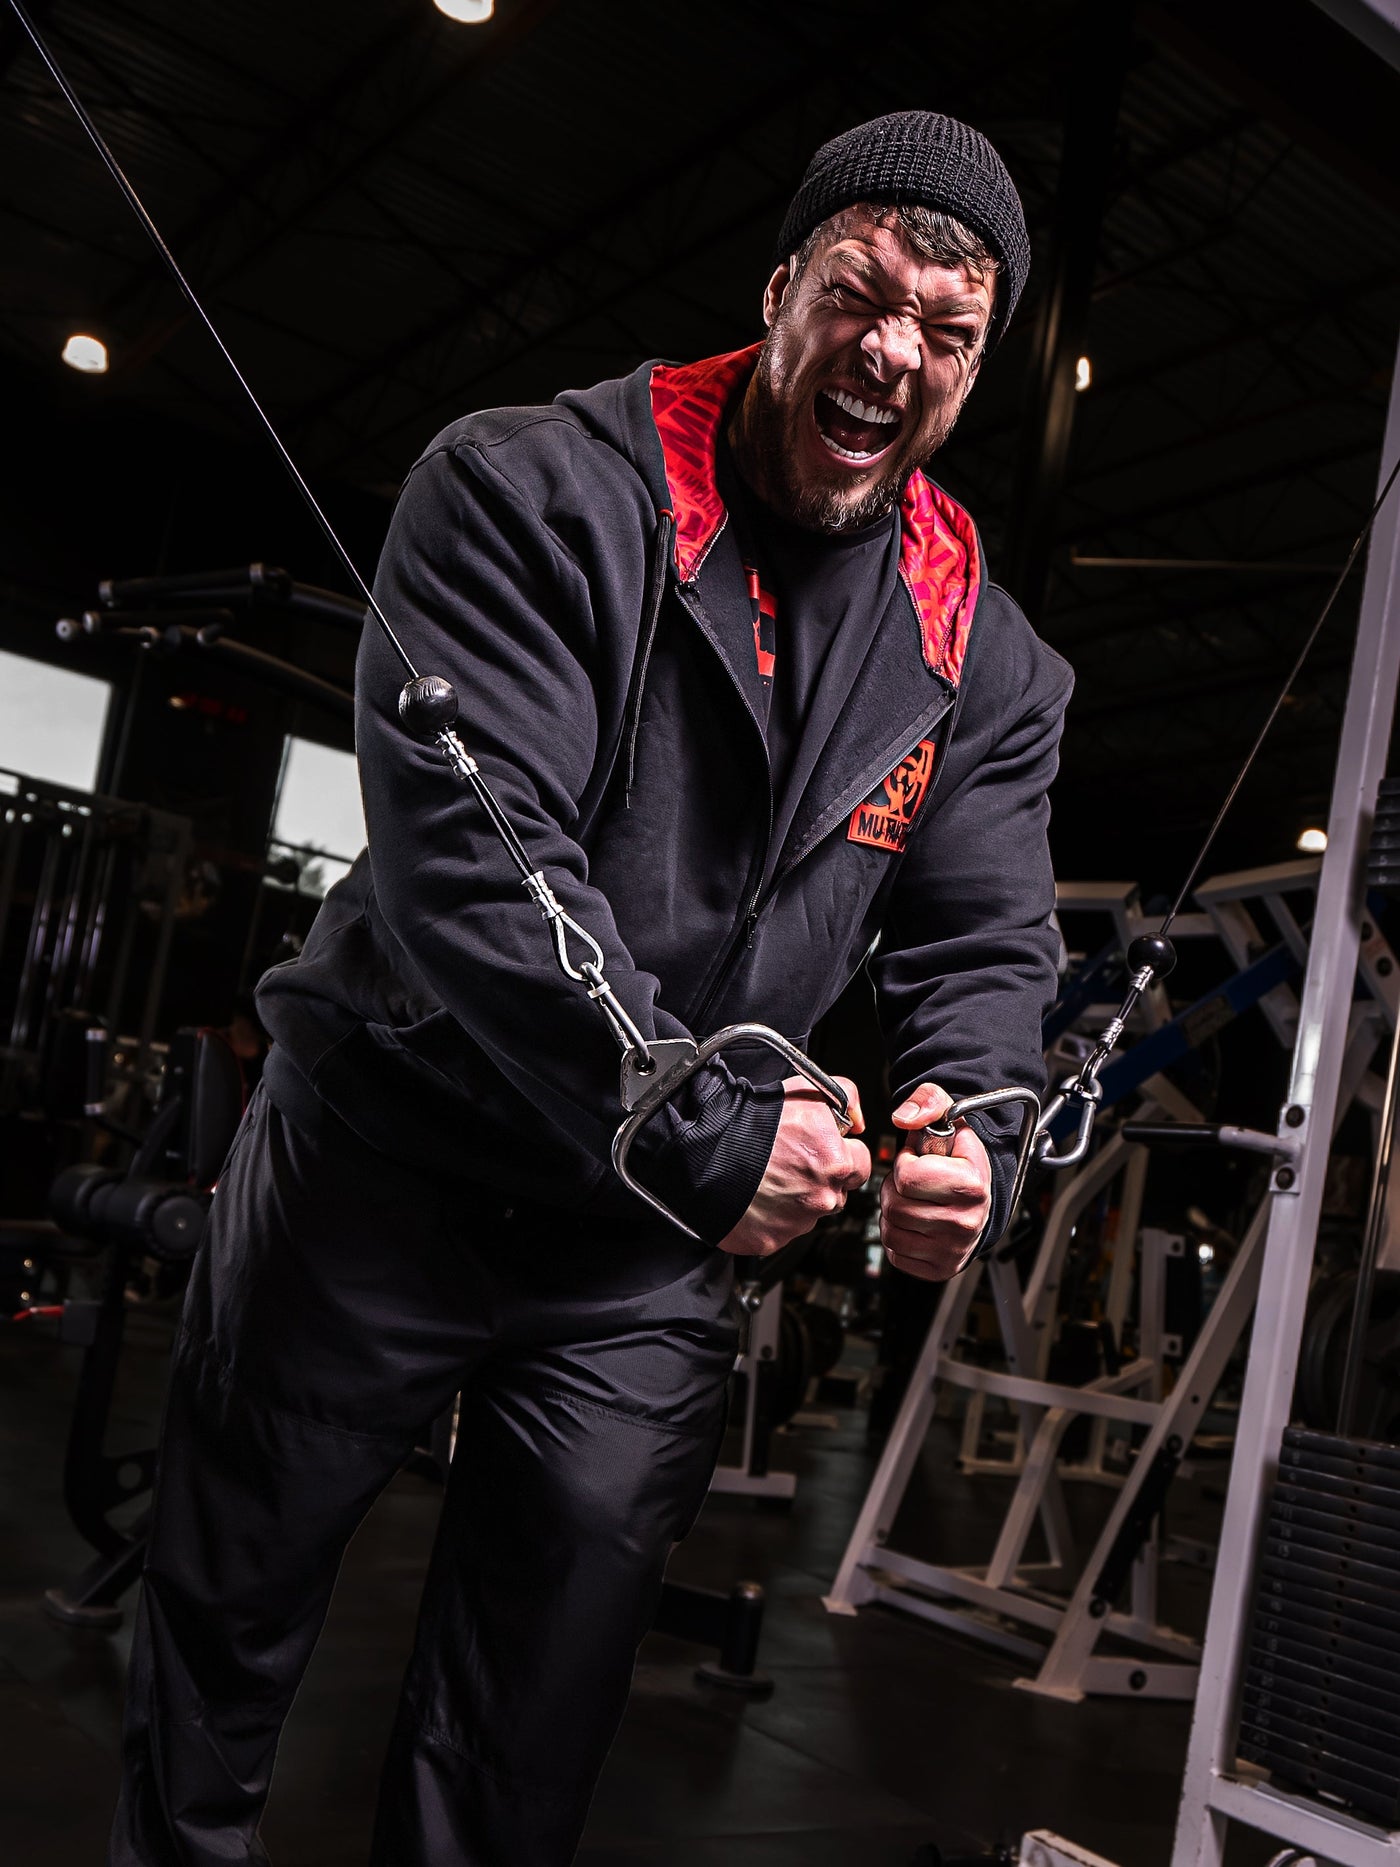 Mutant athlete Jamie Christian is training in the gym wearing Black Mutant Patched Zip-Up Gym Hoodie with a red and black Mutant logo patch on left chest. Two pockets and red hood lining with red watermarked Mutant logo